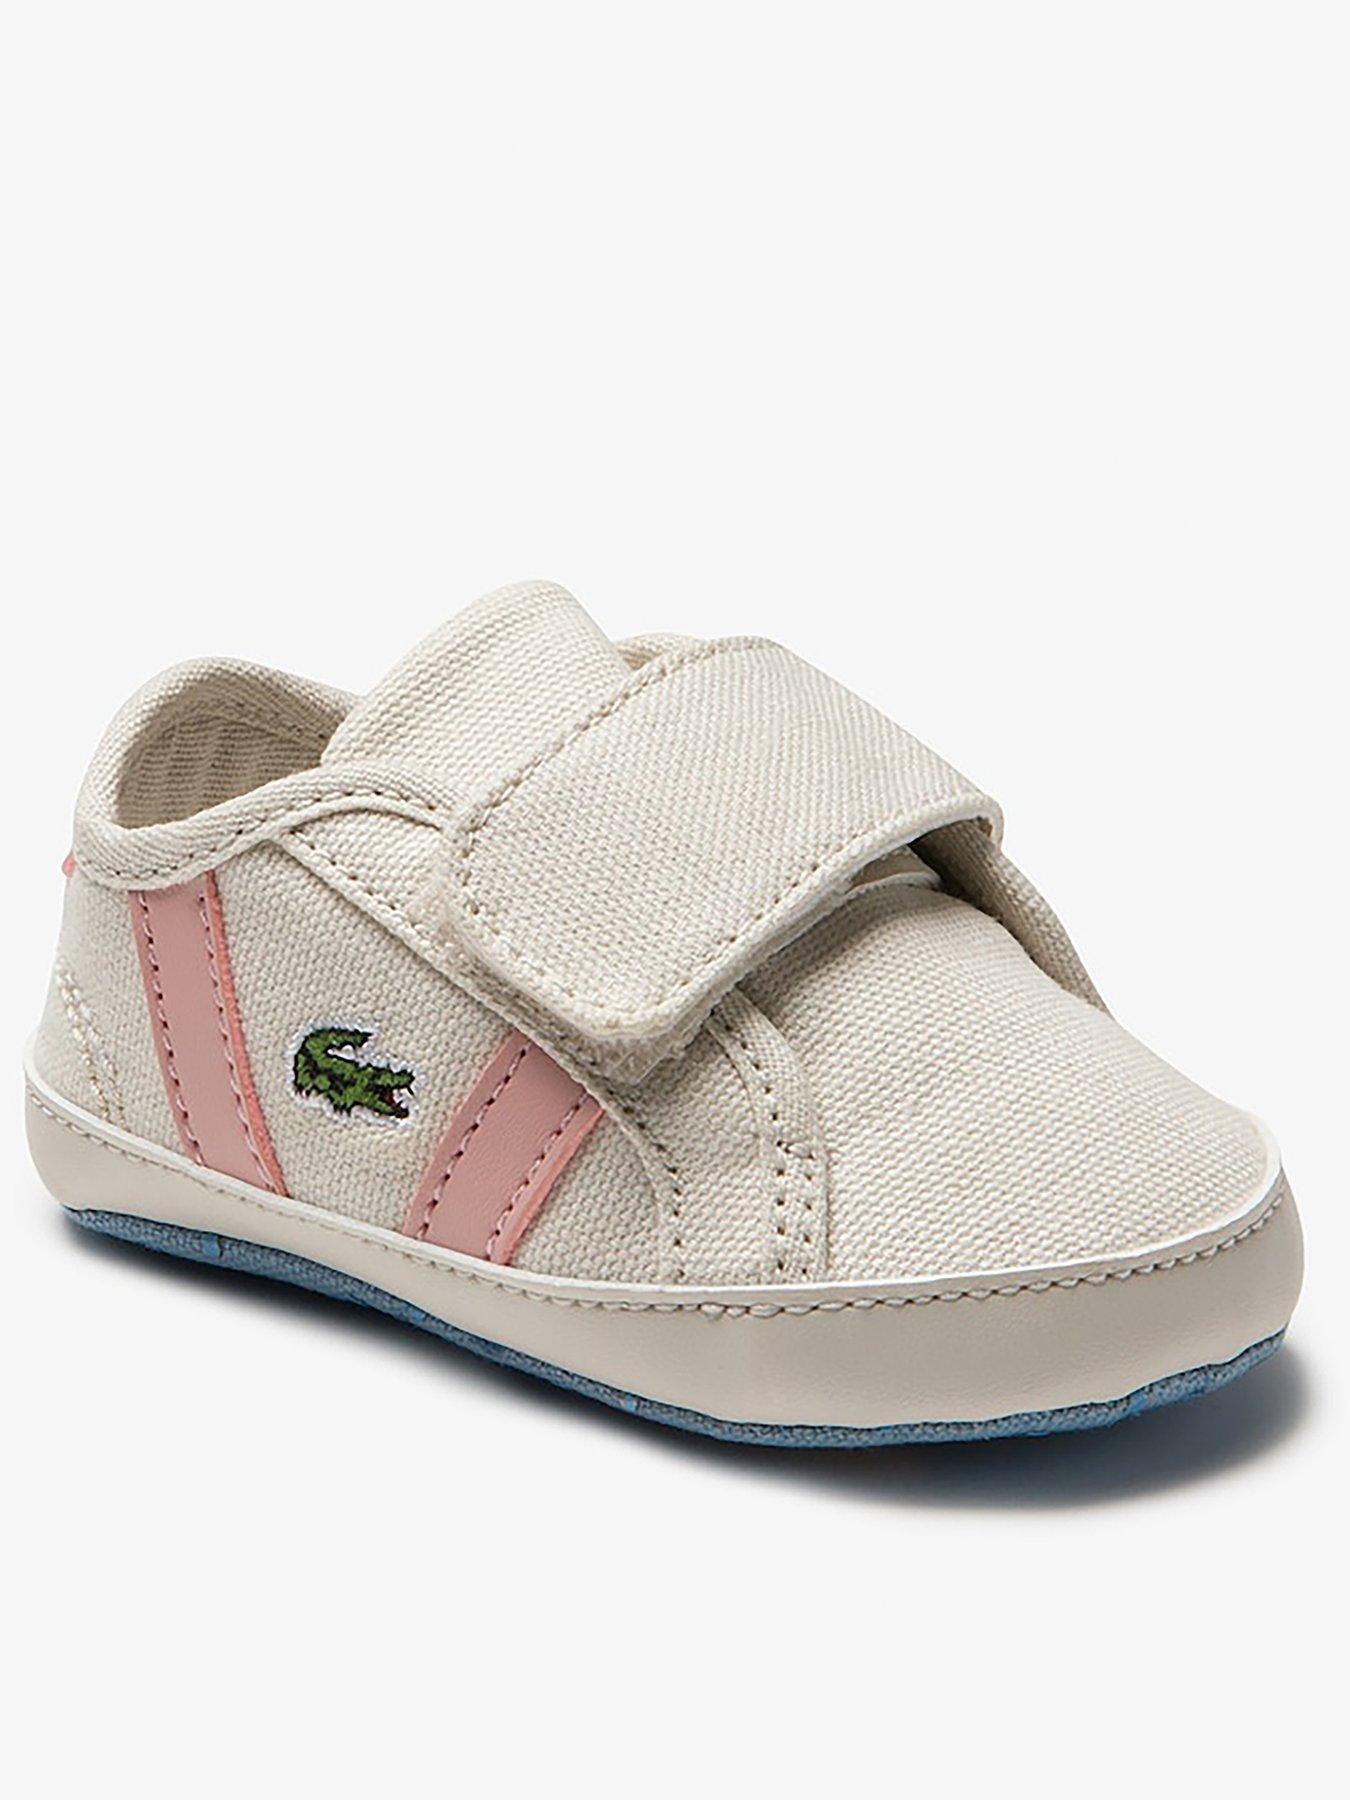 lacoste newborn baby shoes